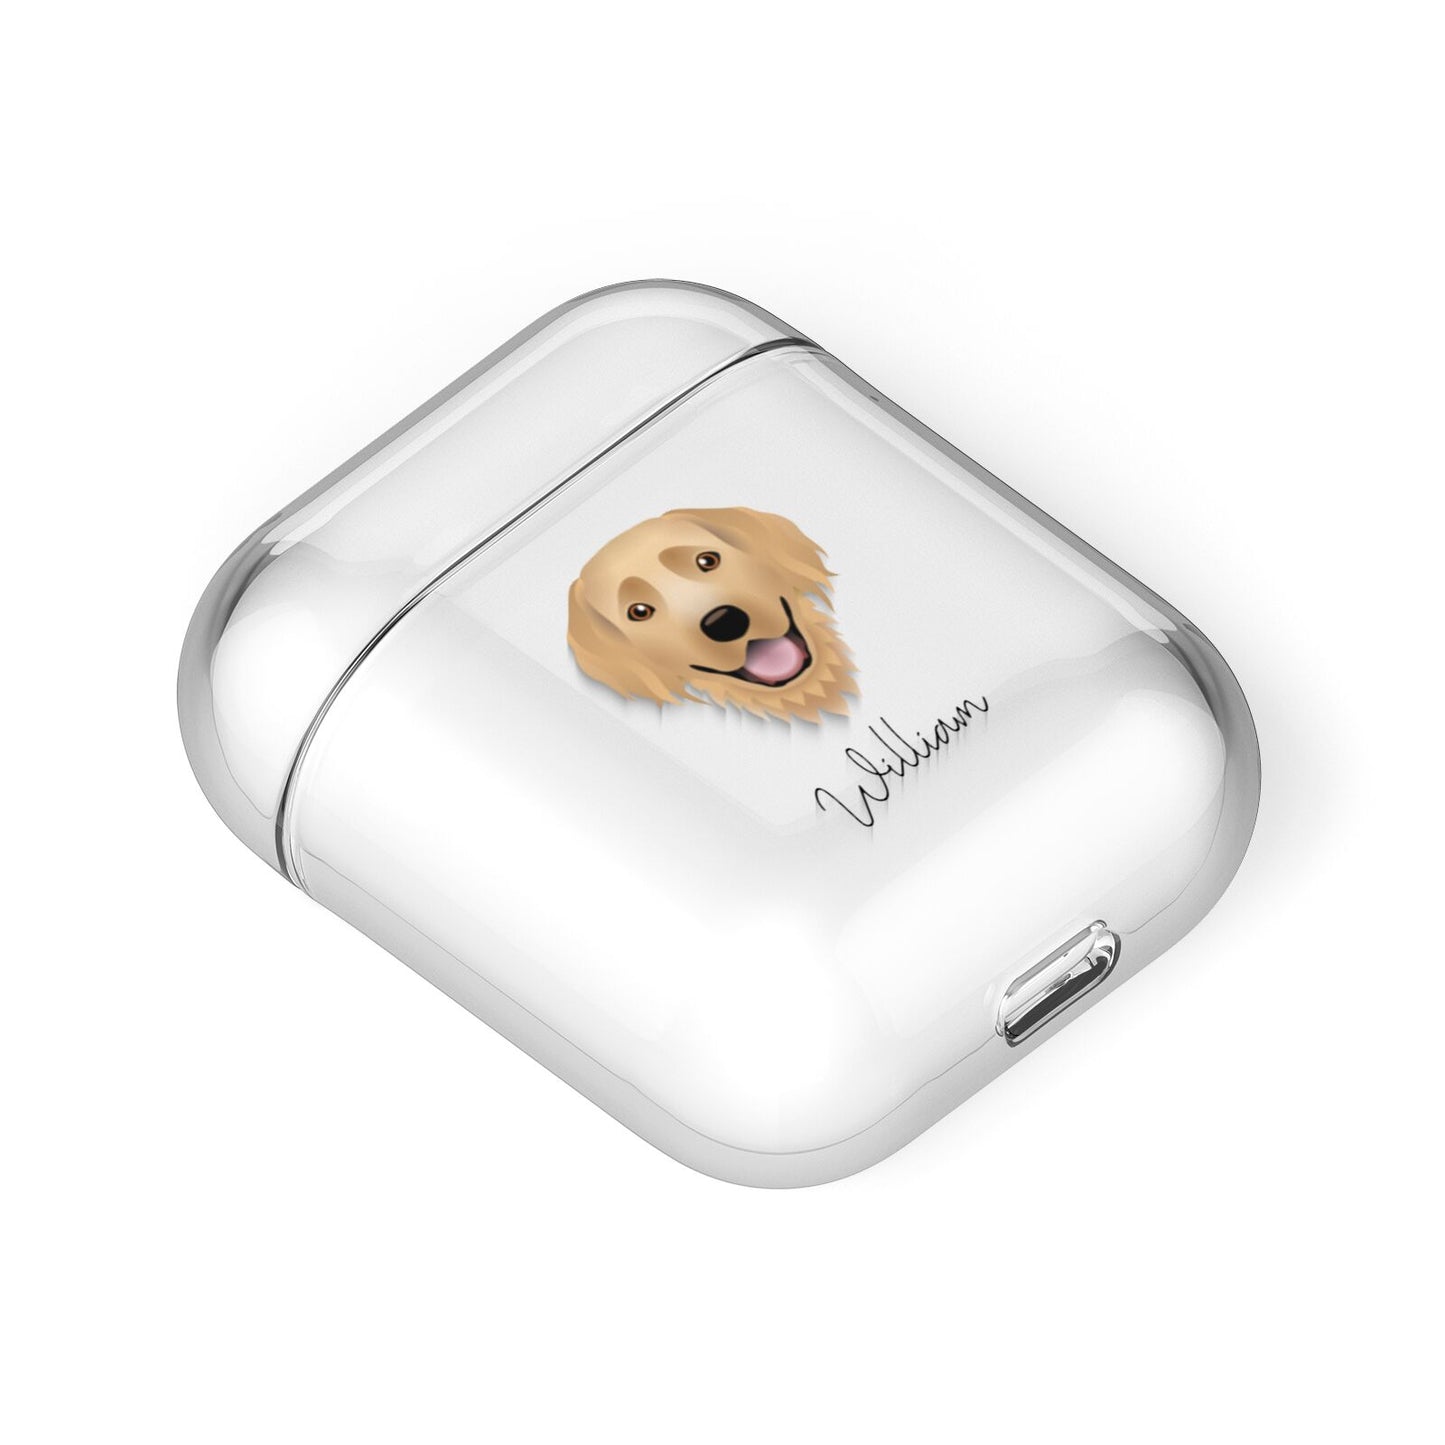 Hovawart Personalised AirPods Case Laid Flat